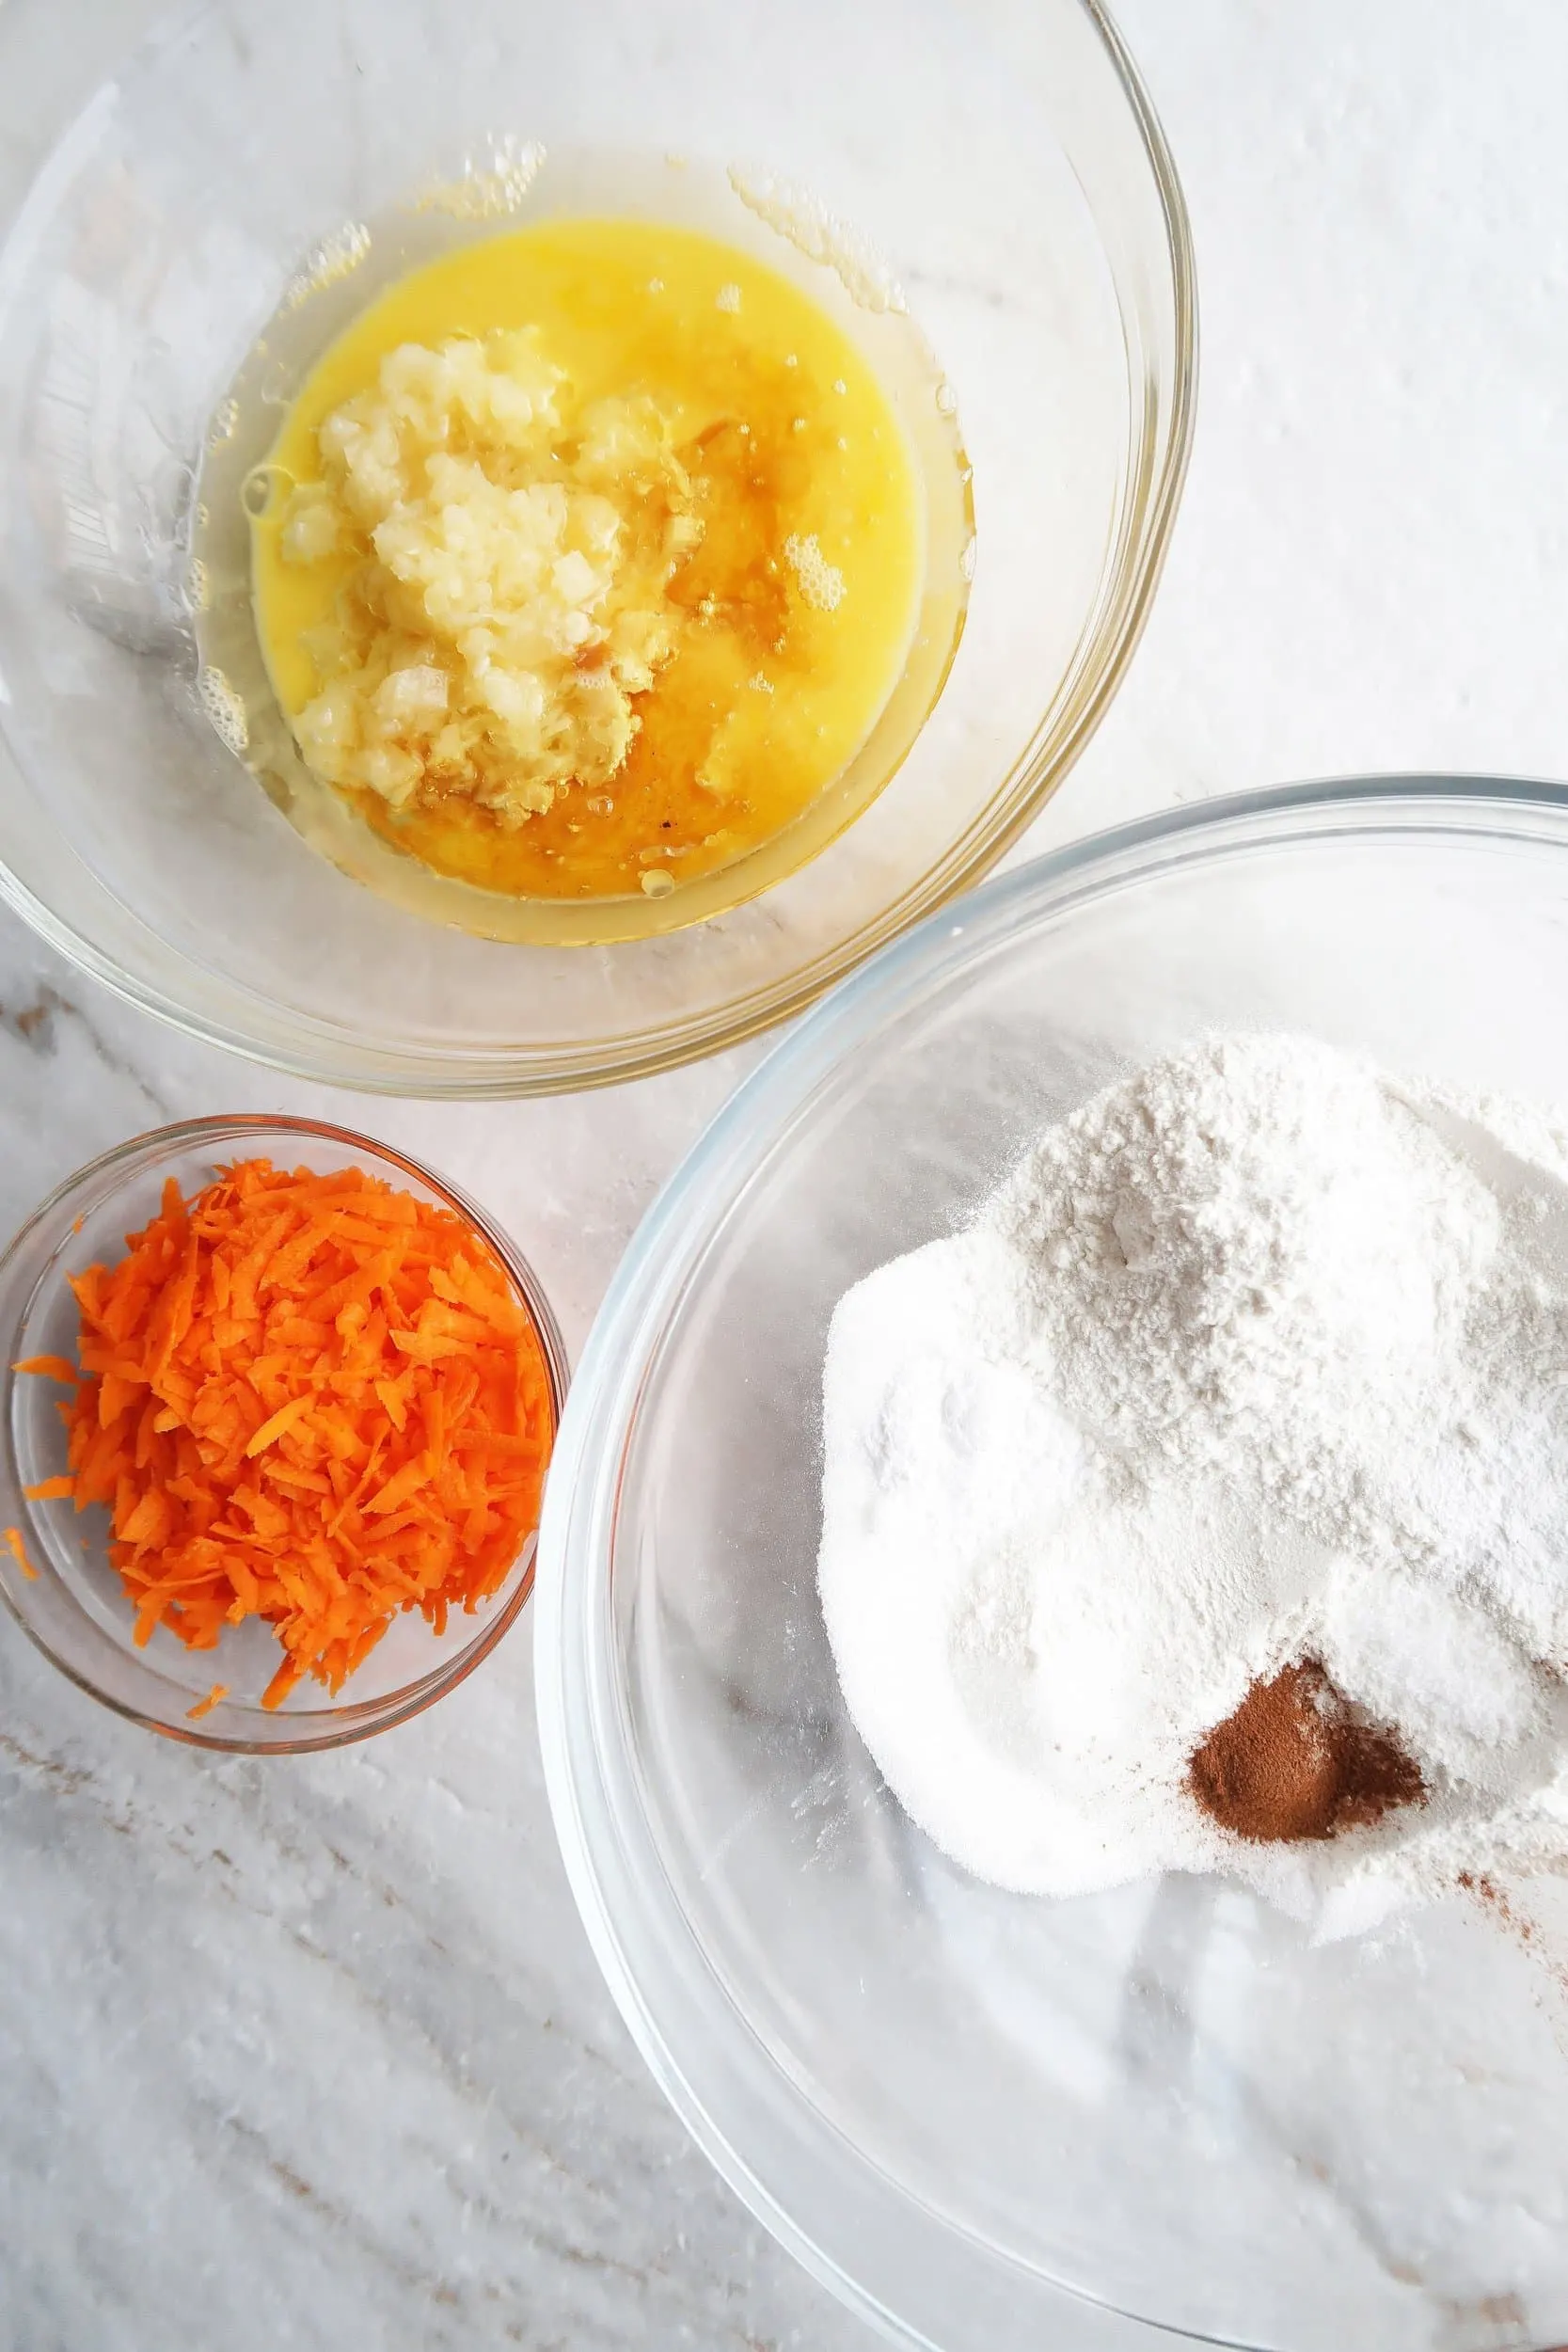 Bowls of shredded carrots and wet and dry muffin ingredients, including crushed pineapple and vegetable oil.